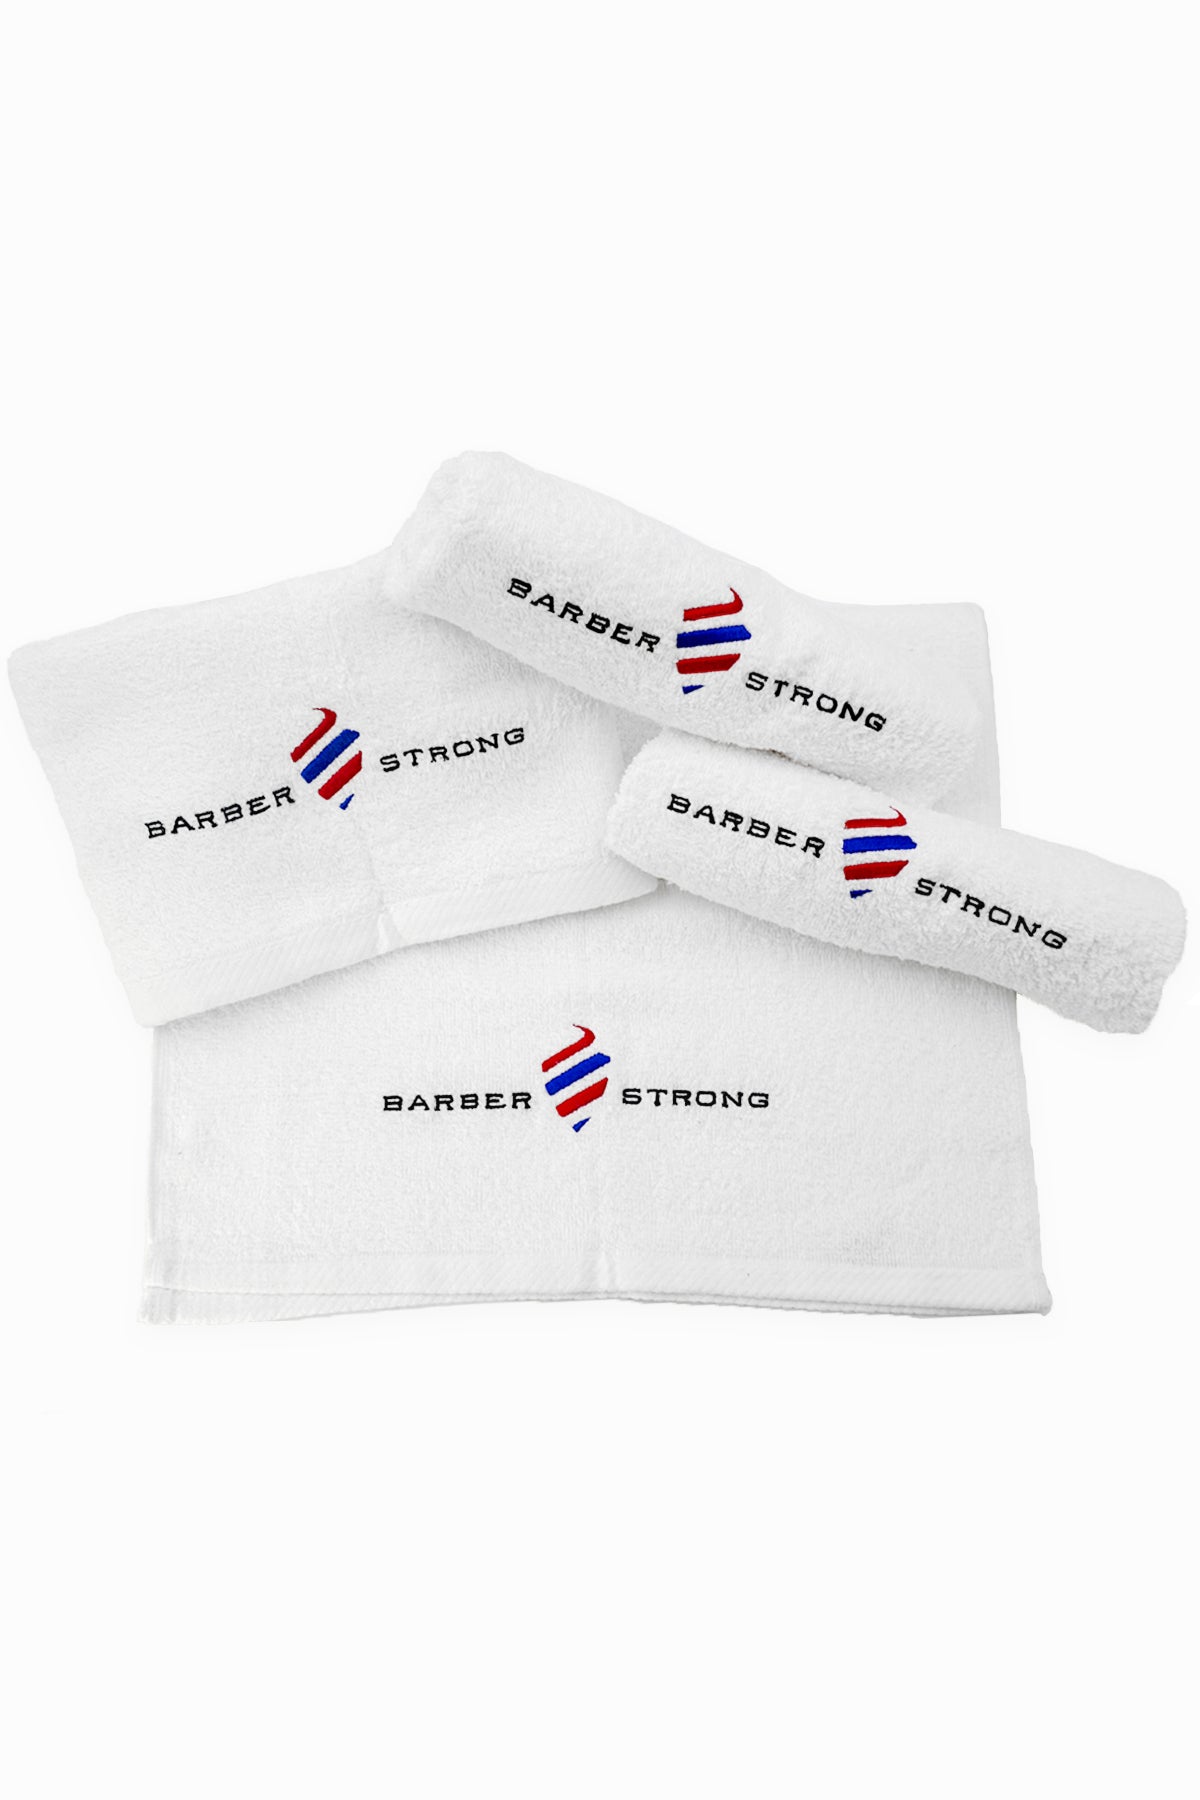 The Barber Towel